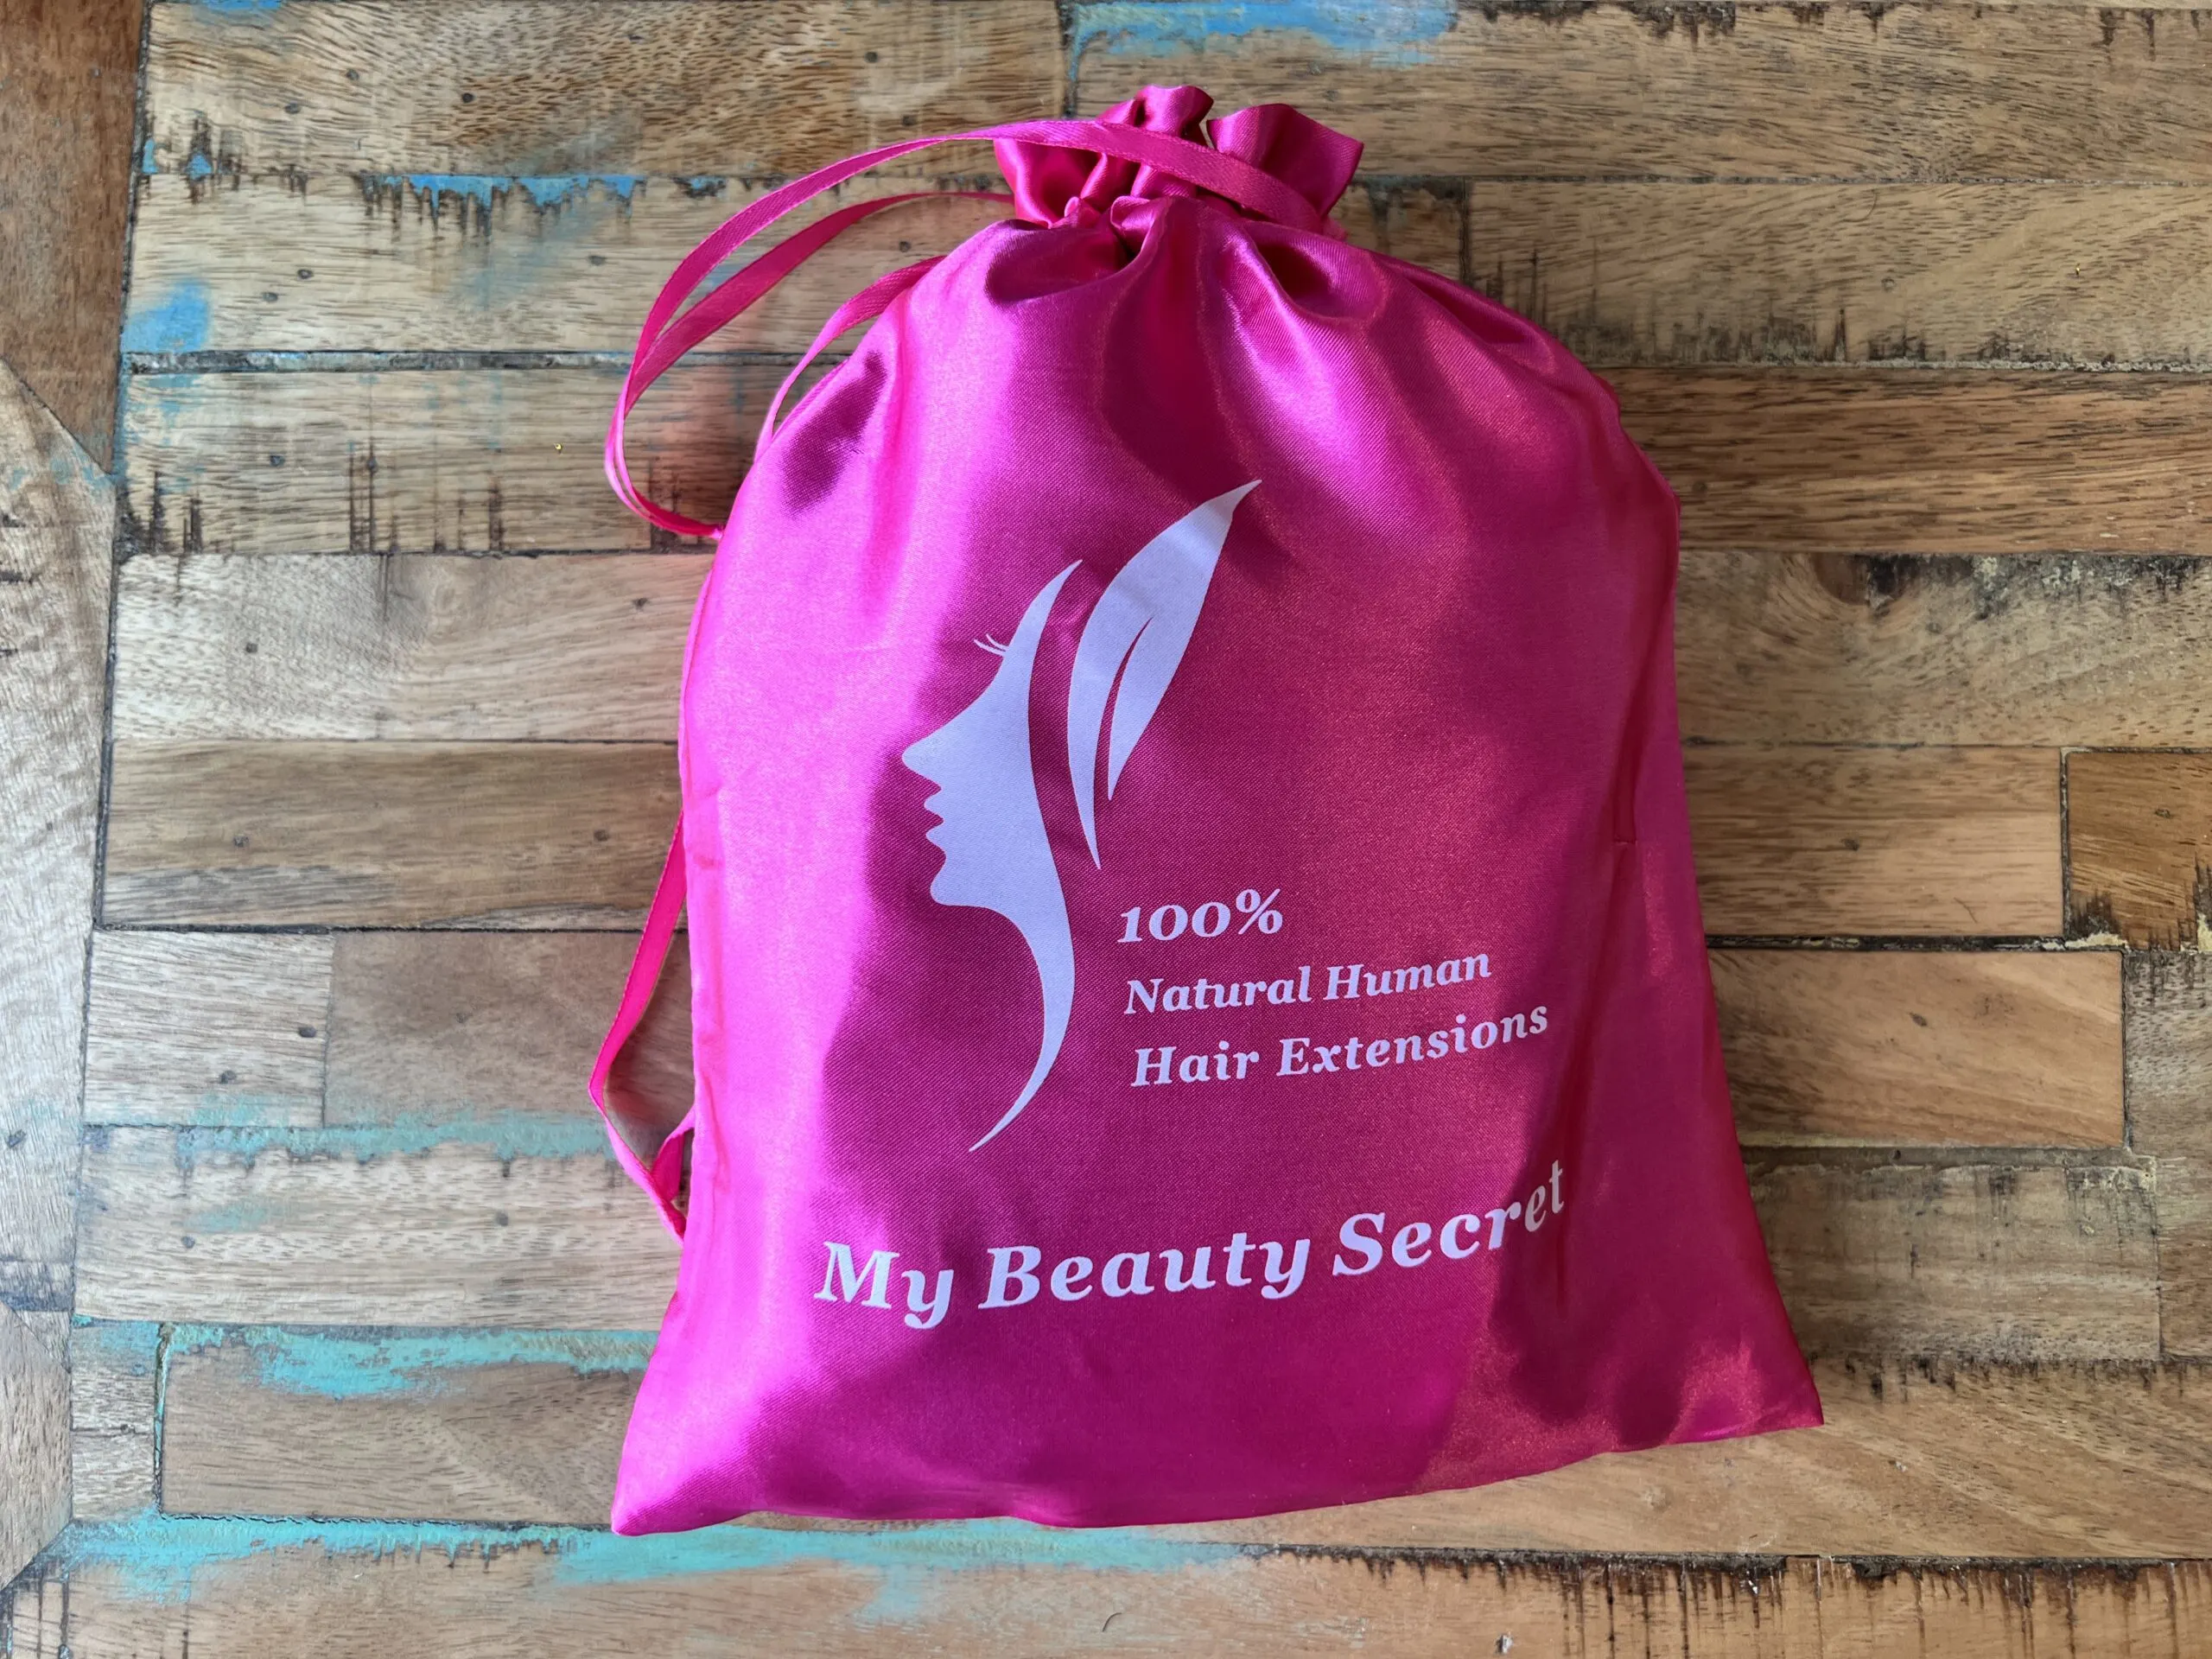 The VADES Body Wave Bundles arrived in this pink bag referencing My Beauty Secret.